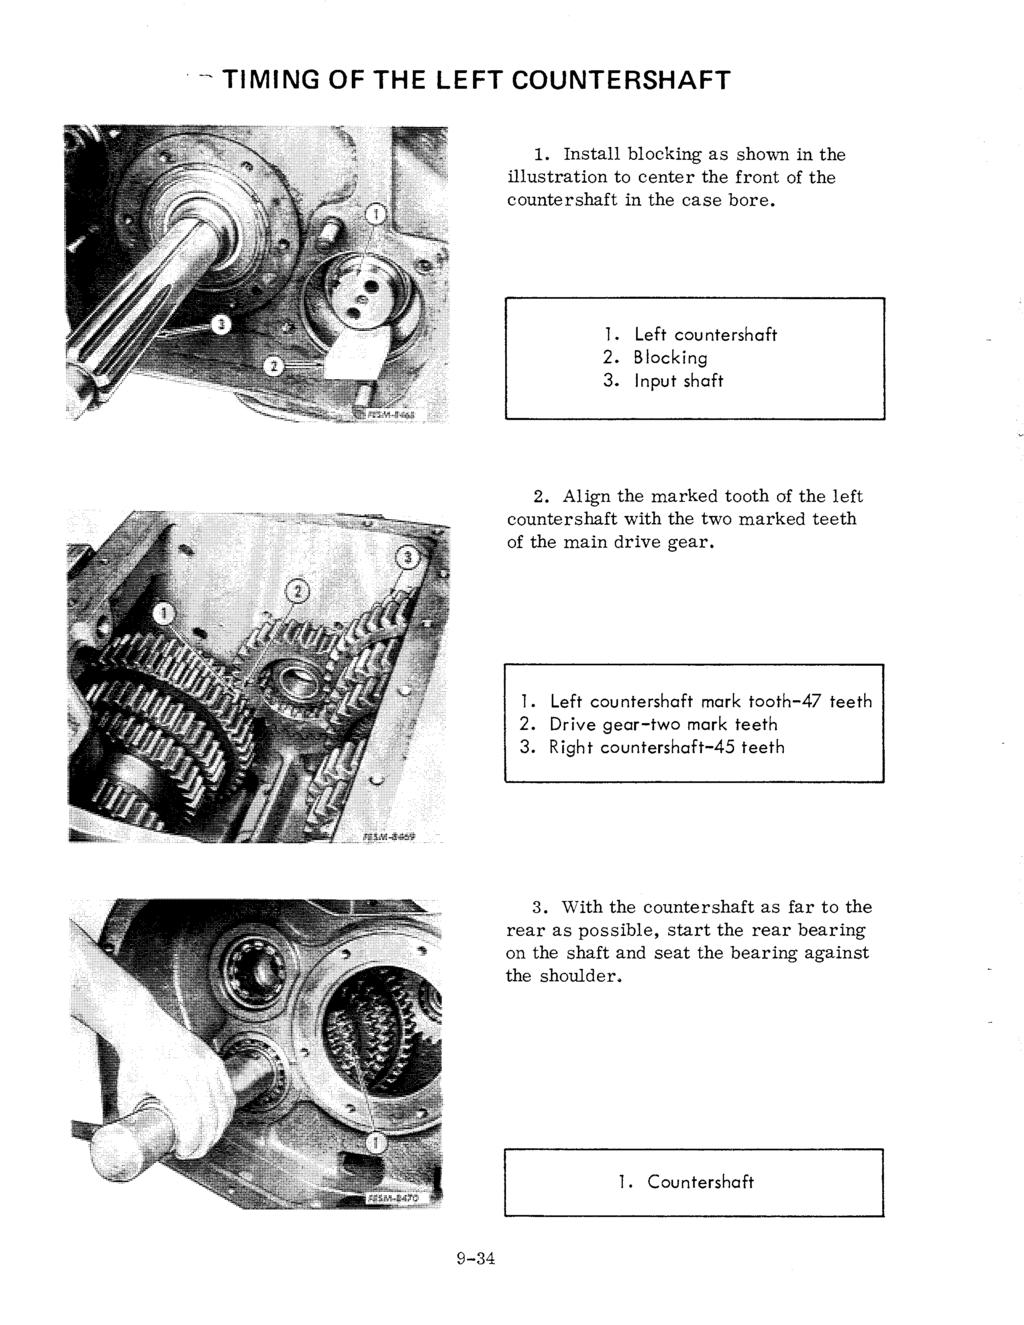 ~ TIMING OF THE LEFT COUNTERSHAFT 1. Install blocking as shown in the illustration to center the front of the countershaft in the case bore. 1. Left countershaft 2. Blocking 3. Input shaft 2.